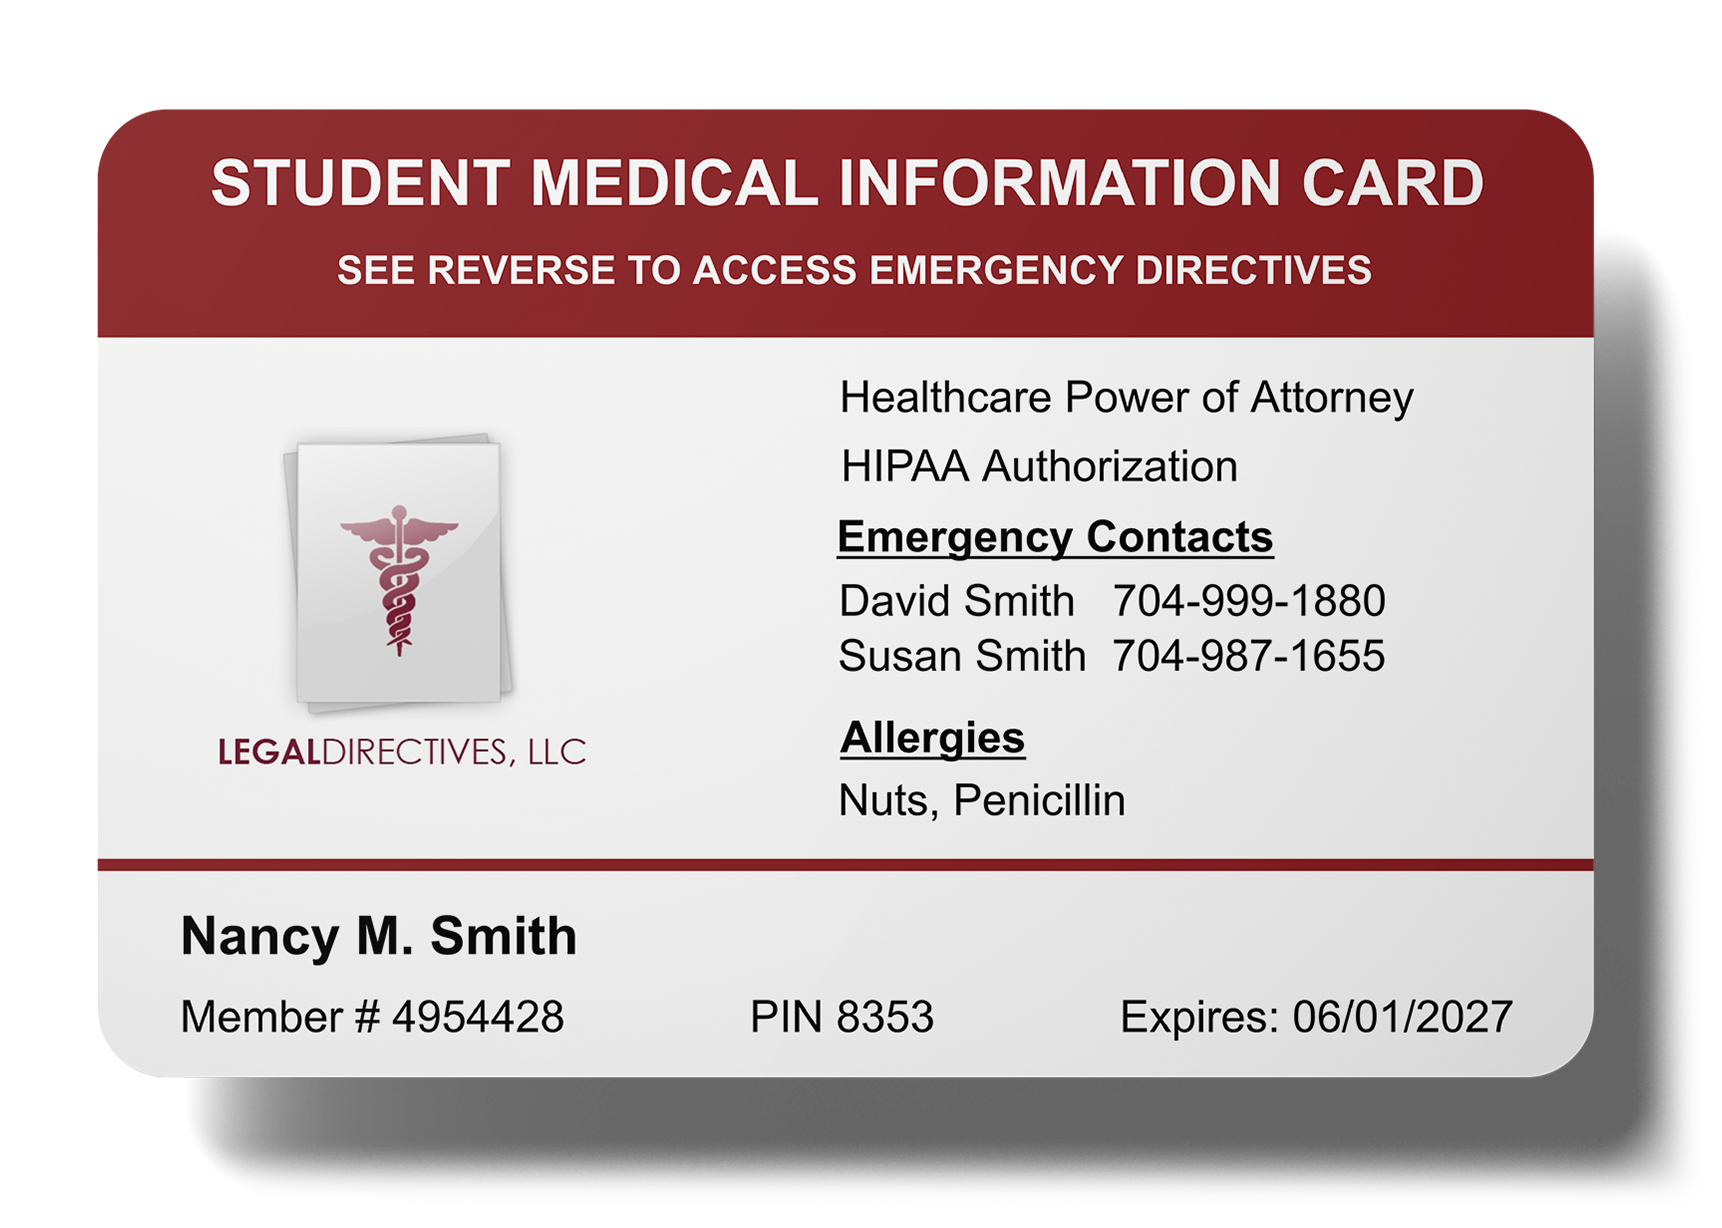 Legal Directives Card